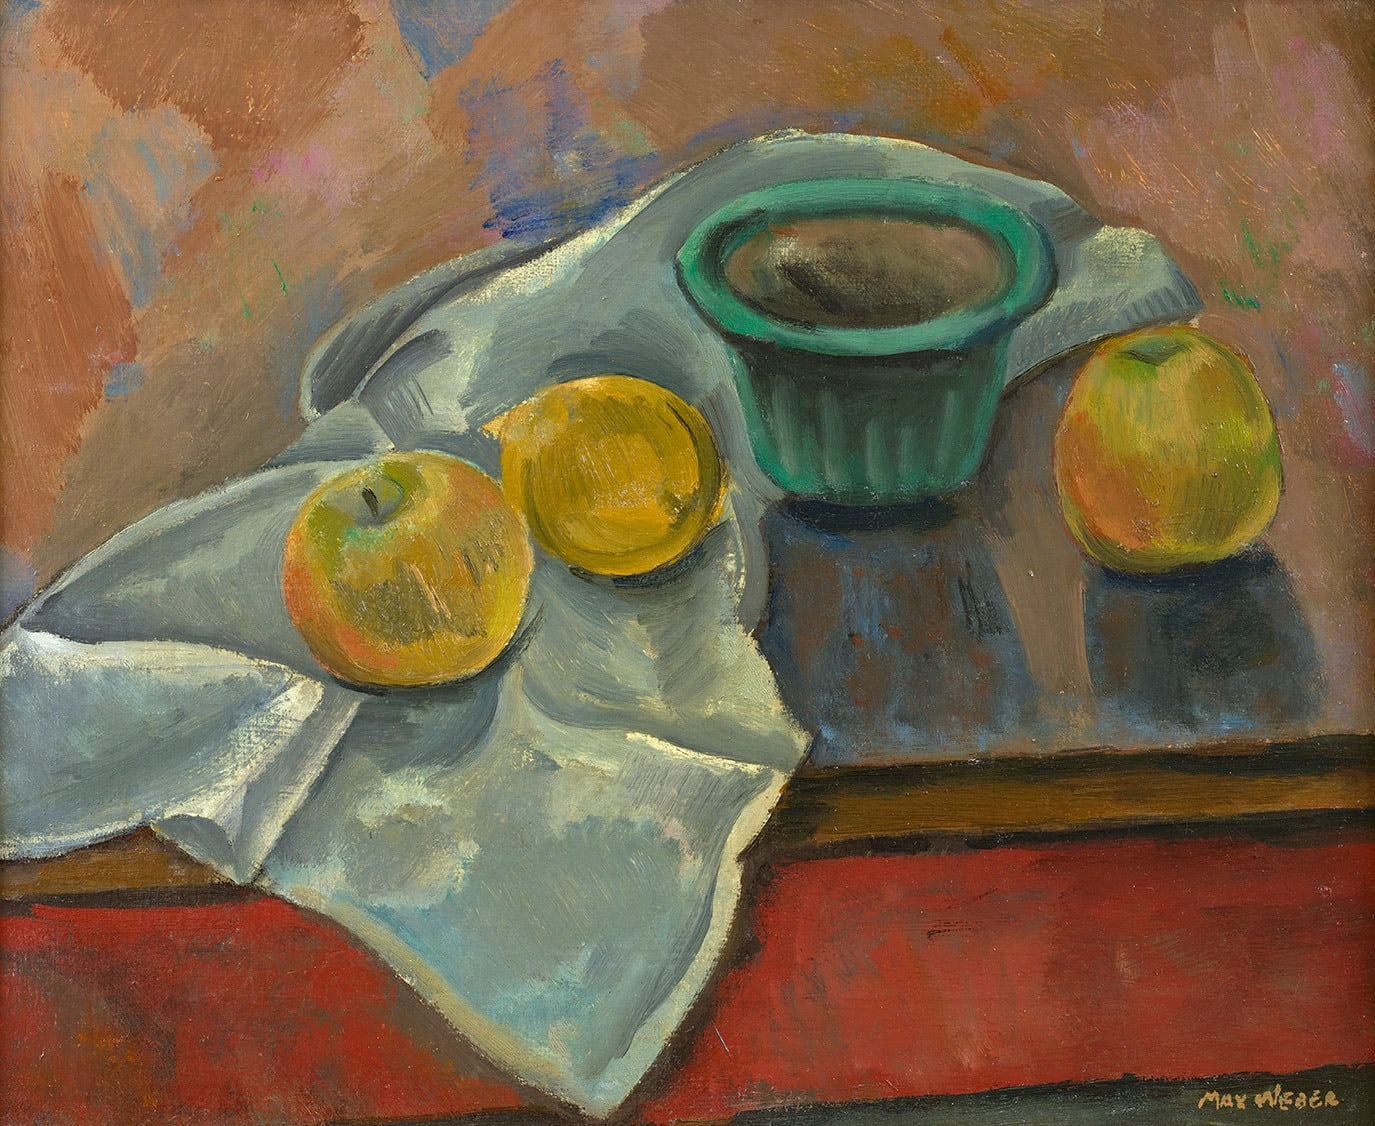 Max Weber, Napkin and Apples, 1920